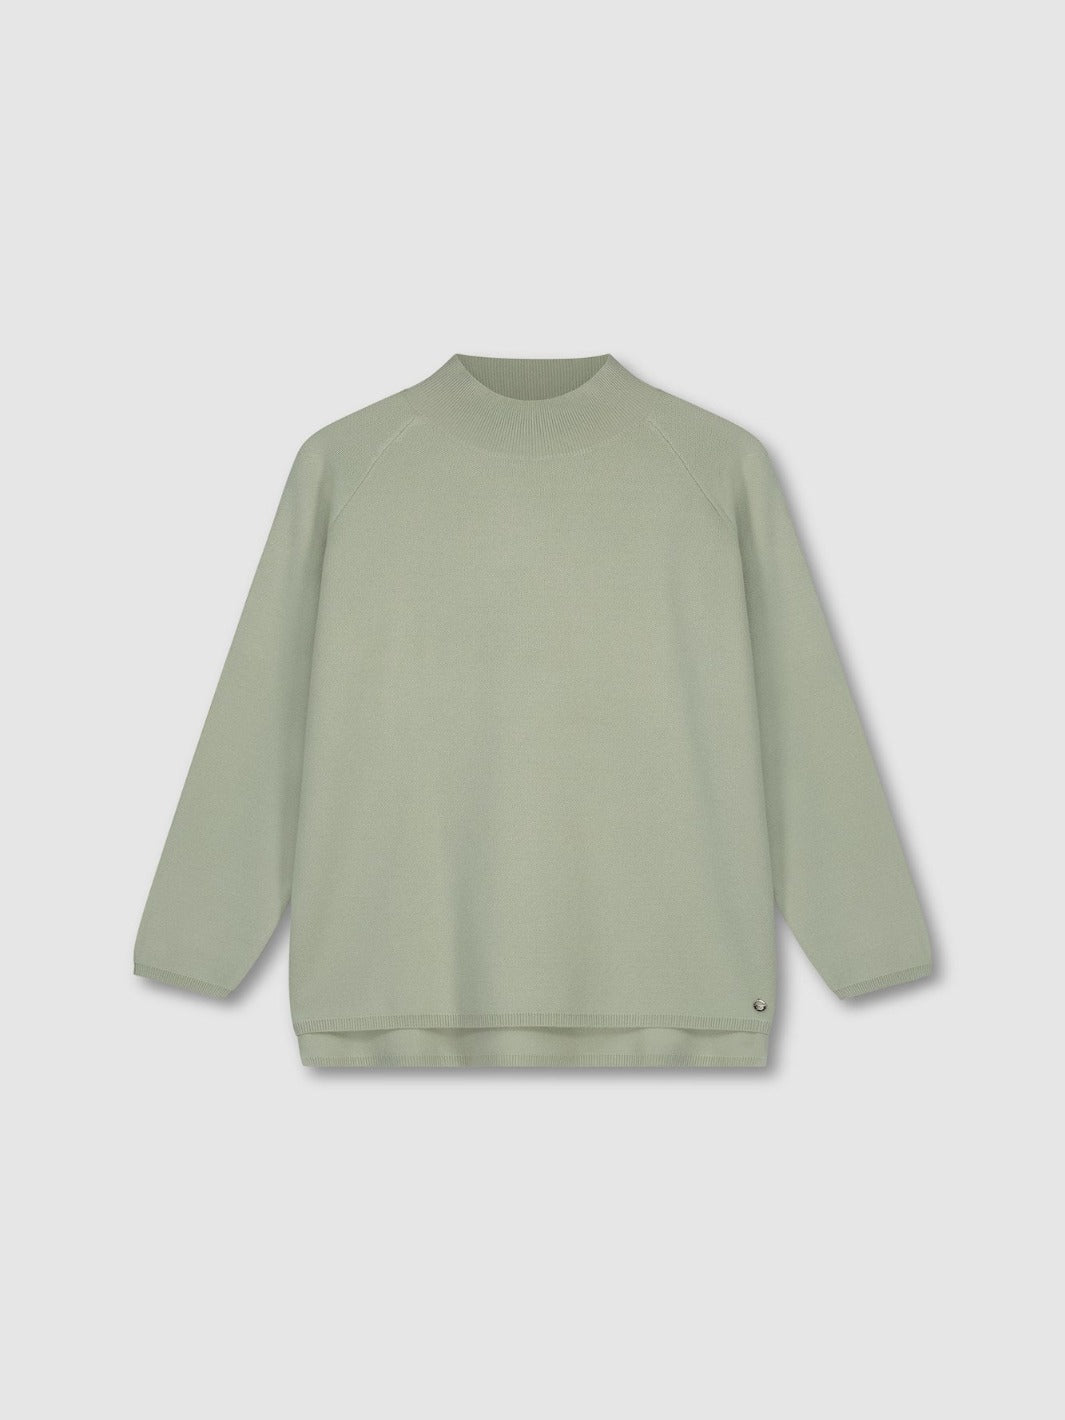 Rino & Pelle Dinty Sweater In Sage-Nicola Ross